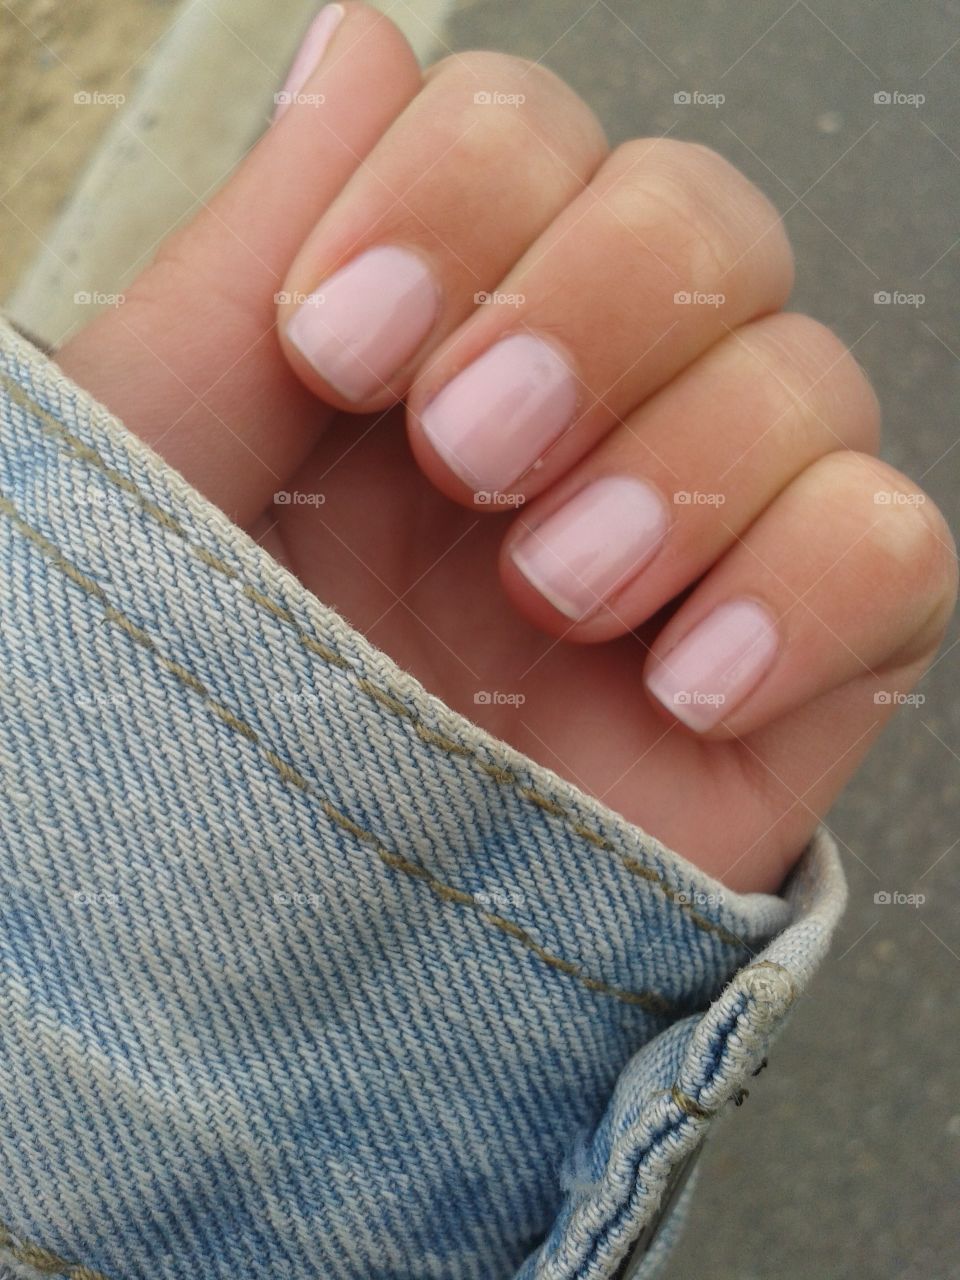 French Pink